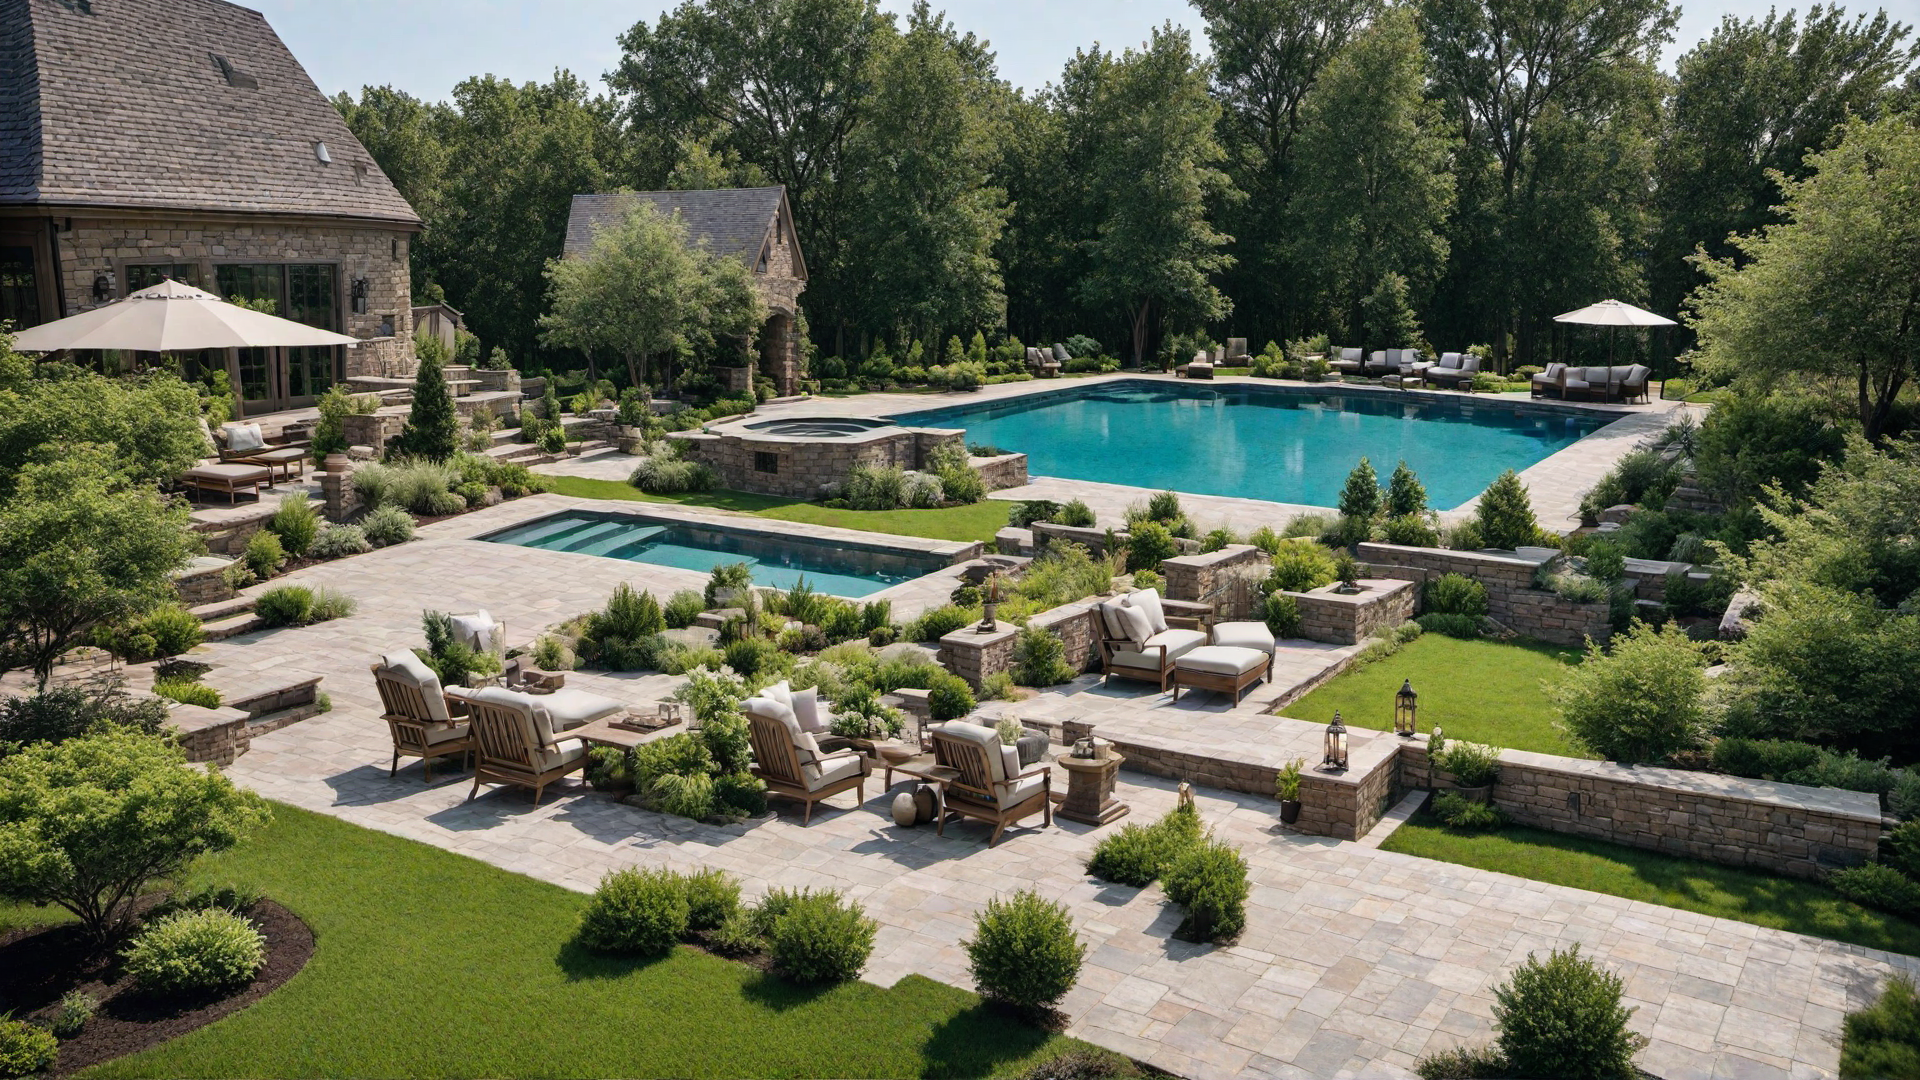 Rustic Charm: Pool with Stone Surround and Wood Decking